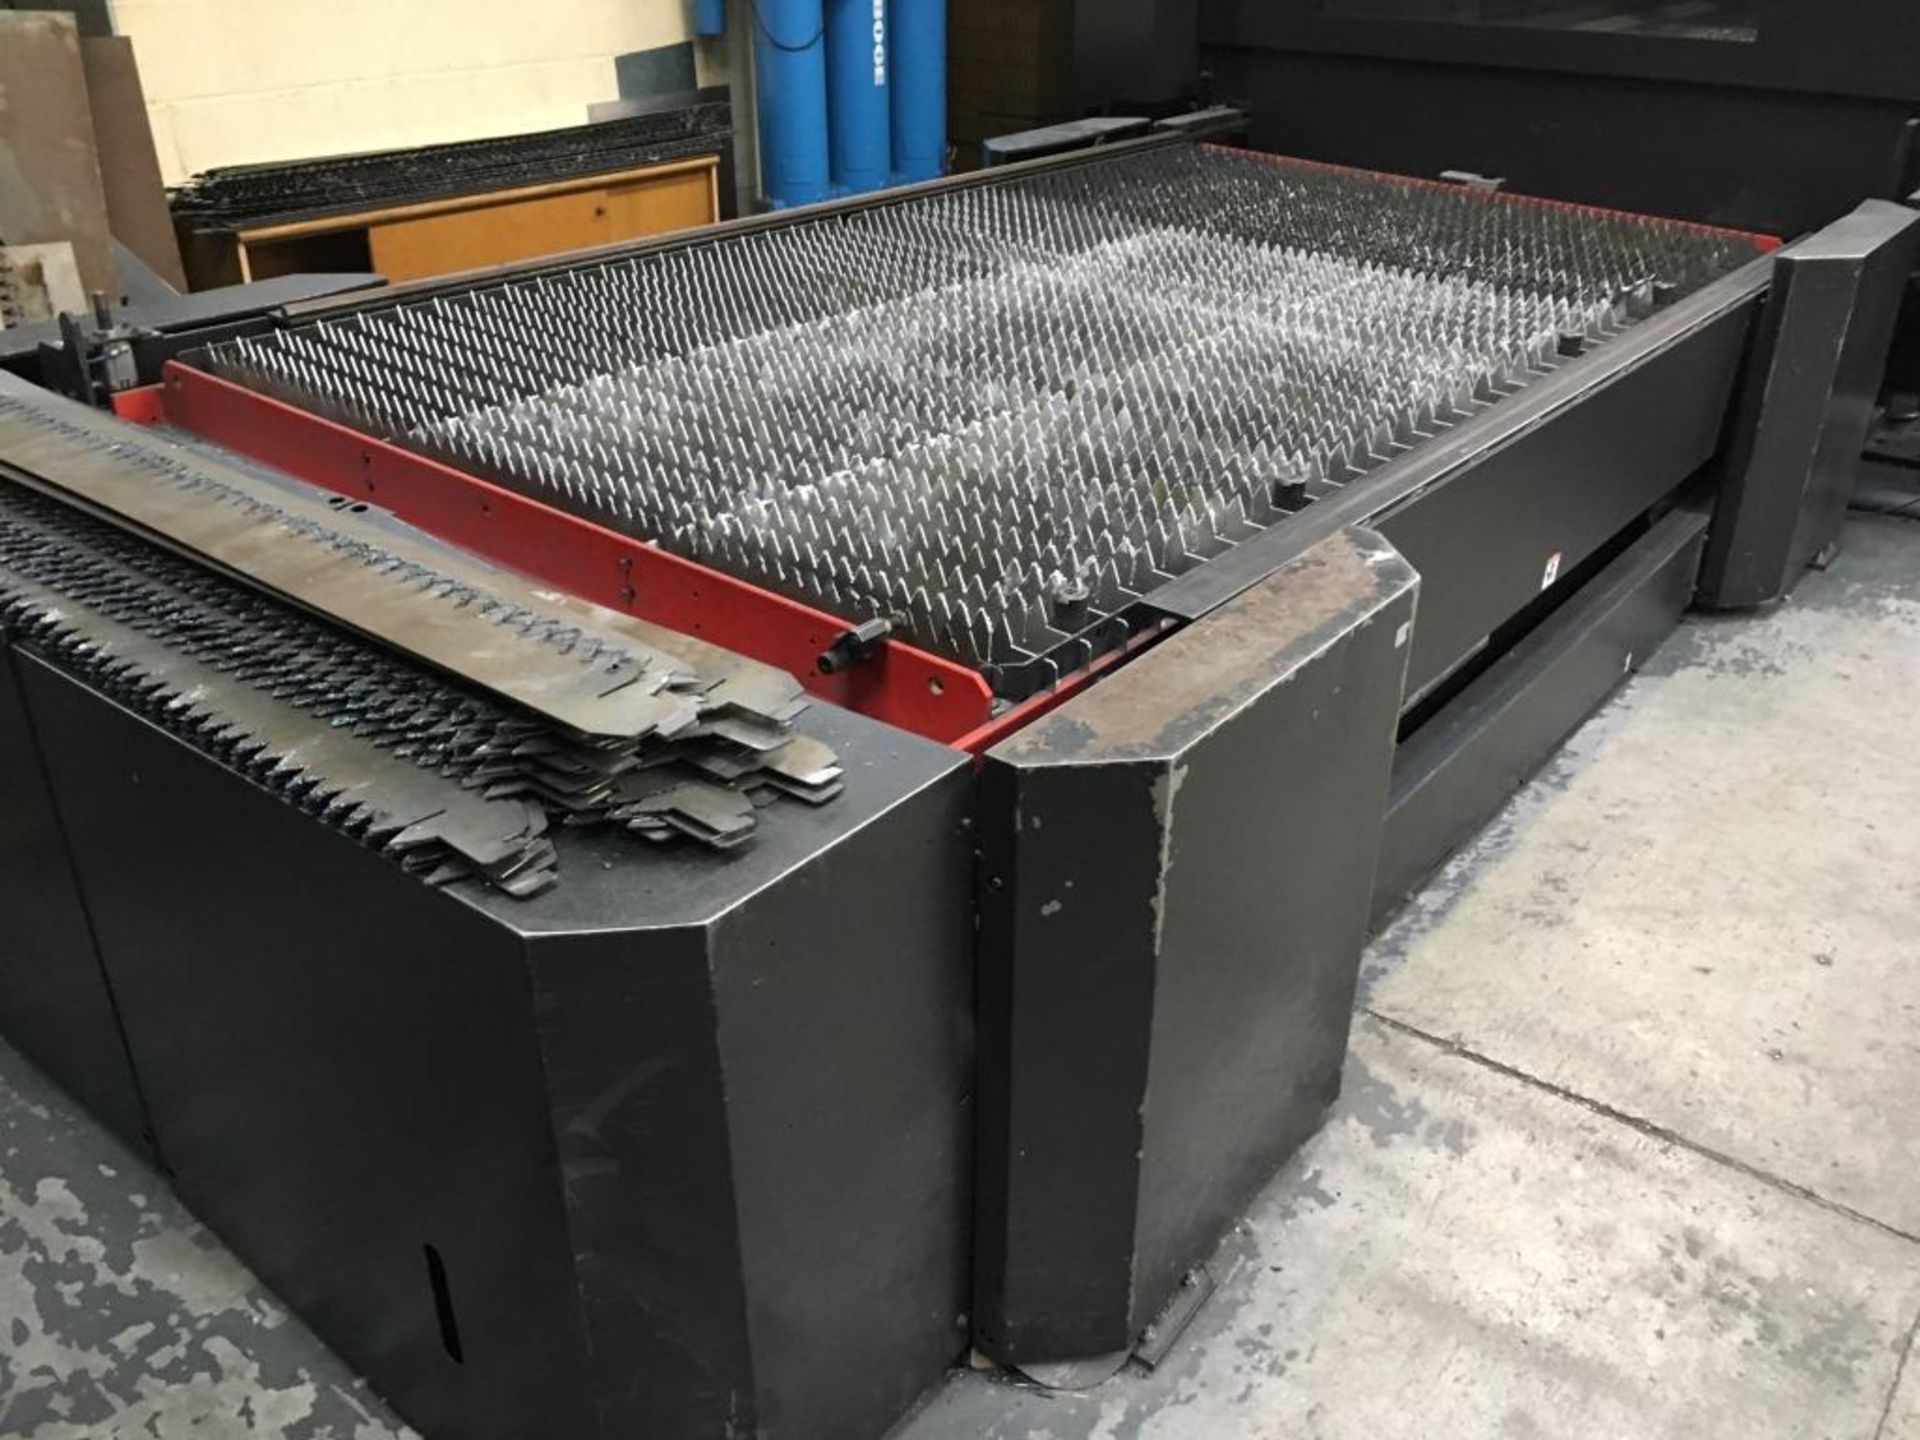 Amada FO MII 3015 NT 4 kw laser cutter, Year of manufacture: 2011, Serial No. 033, approx. 15,000 - Image 12 of 22